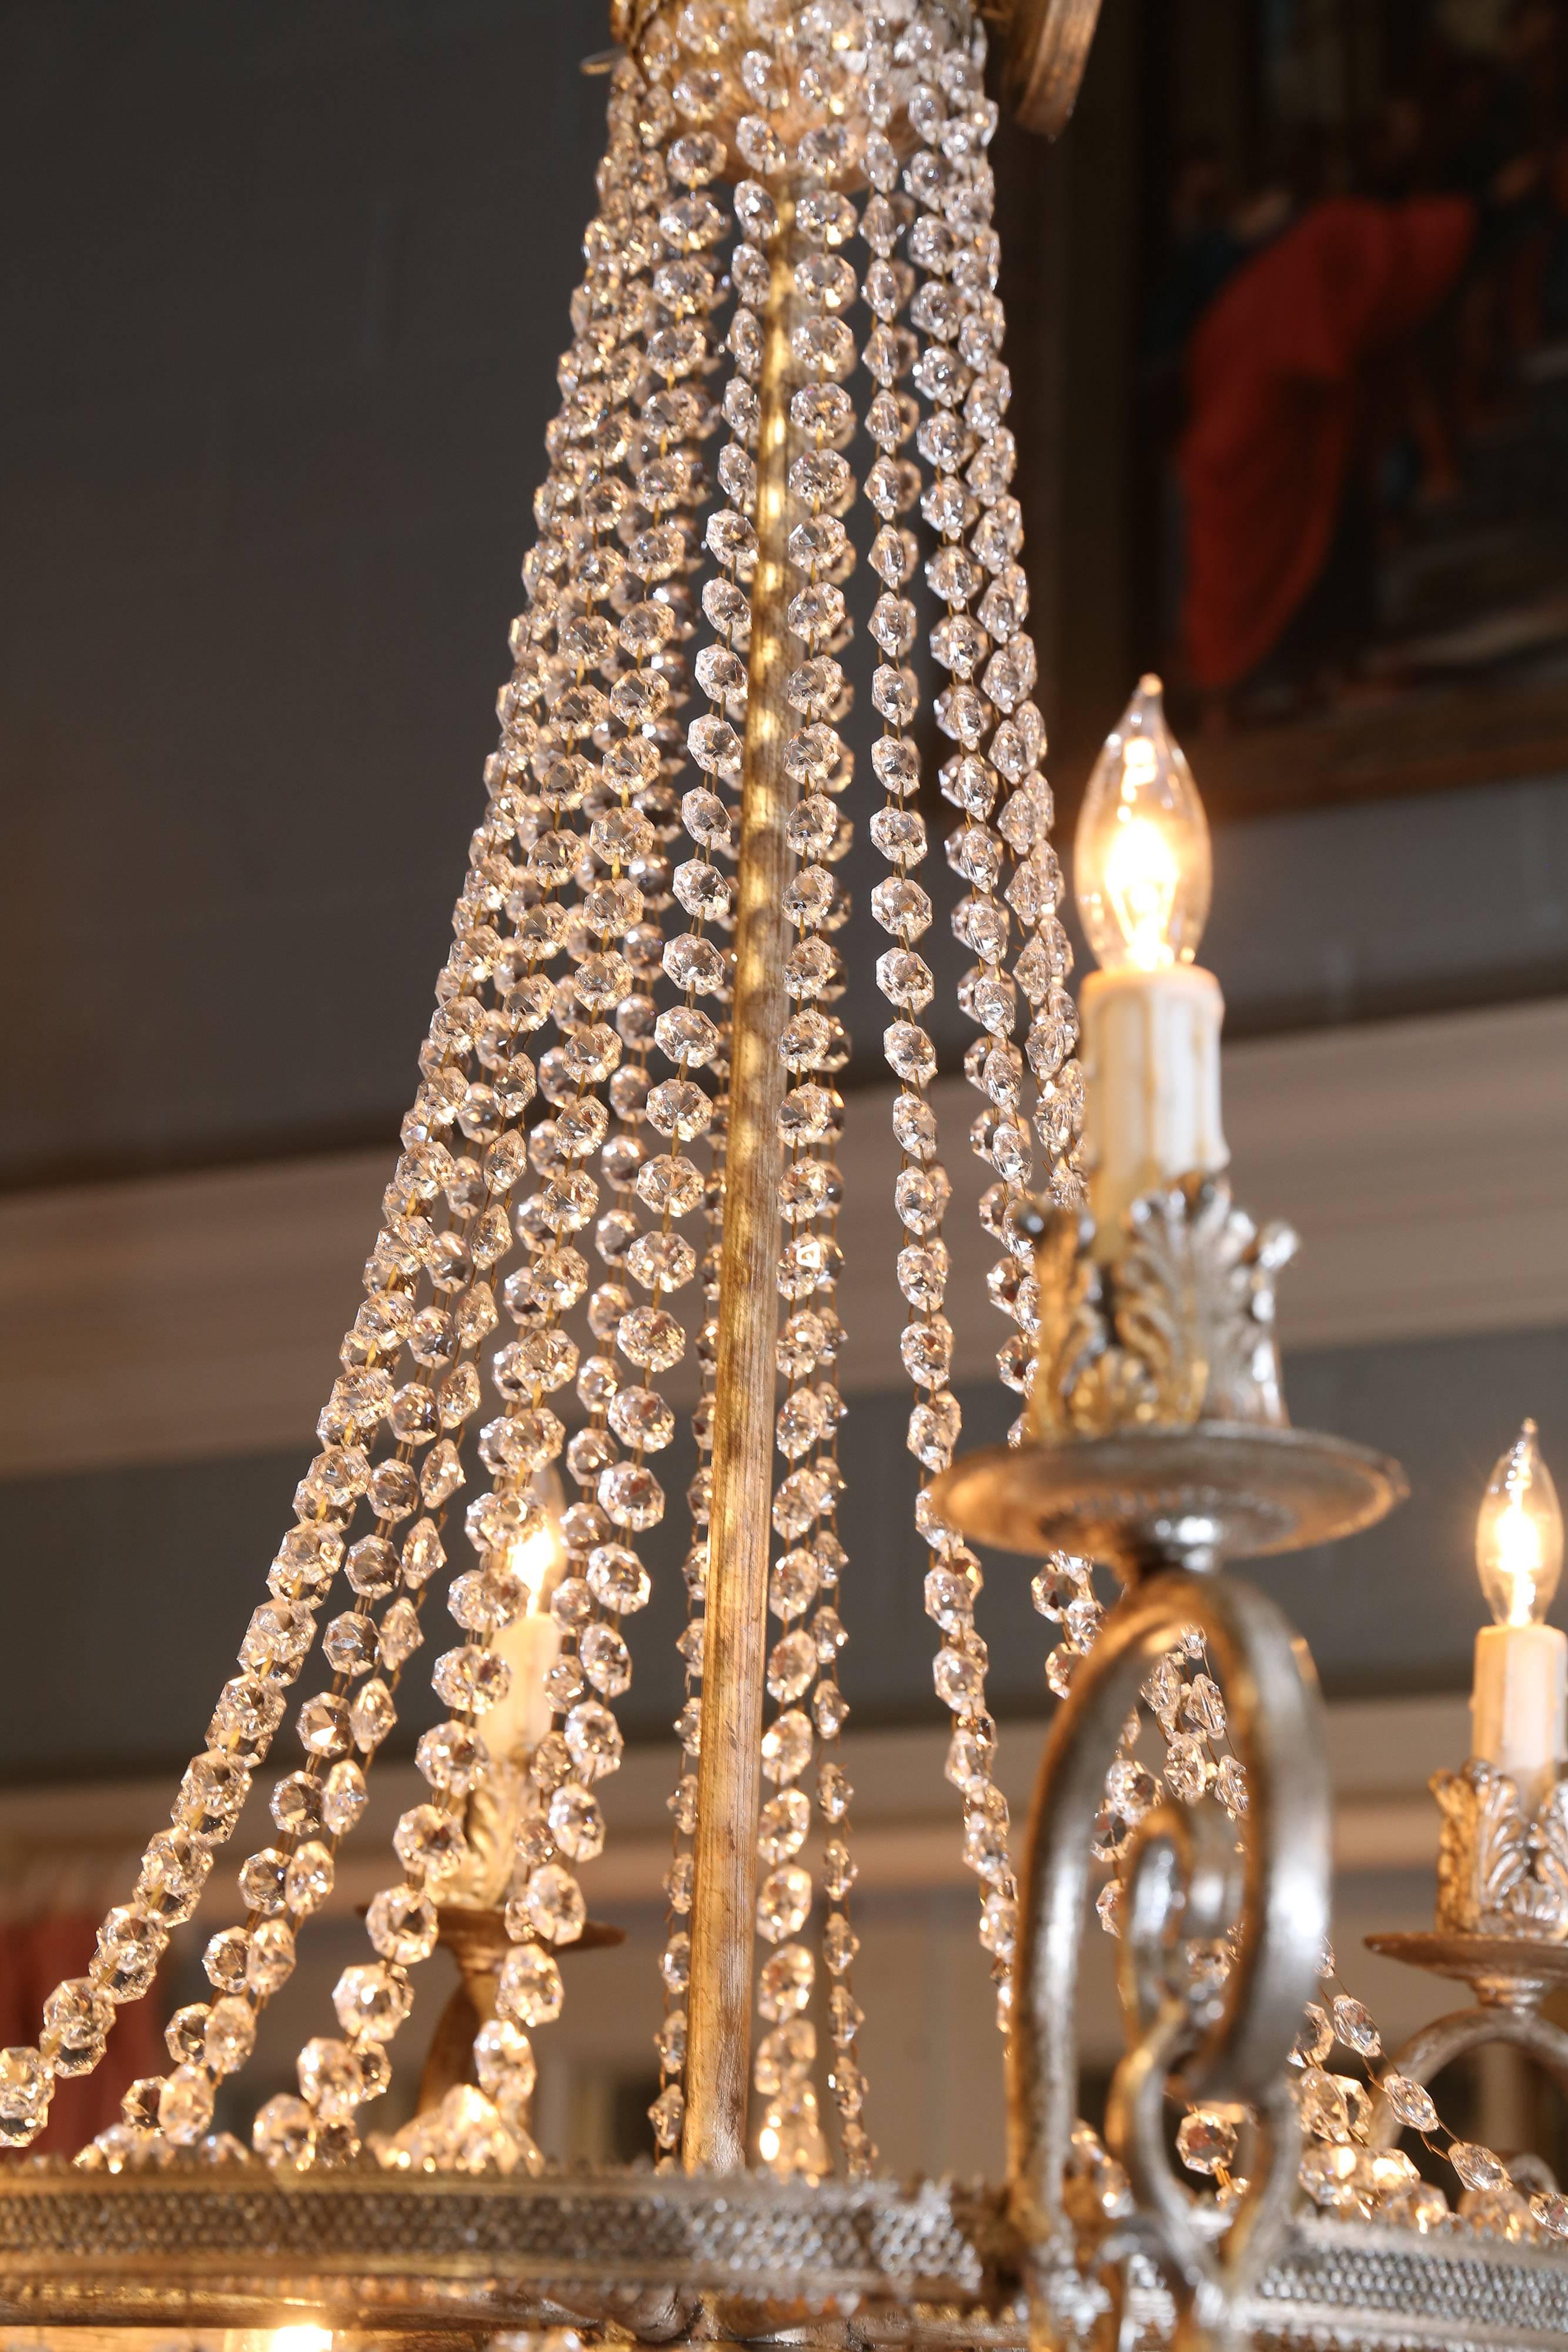 Six-Light Empire Style Chandelier with a Silver Finish In Excellent Condition For Sale In Houston, TX